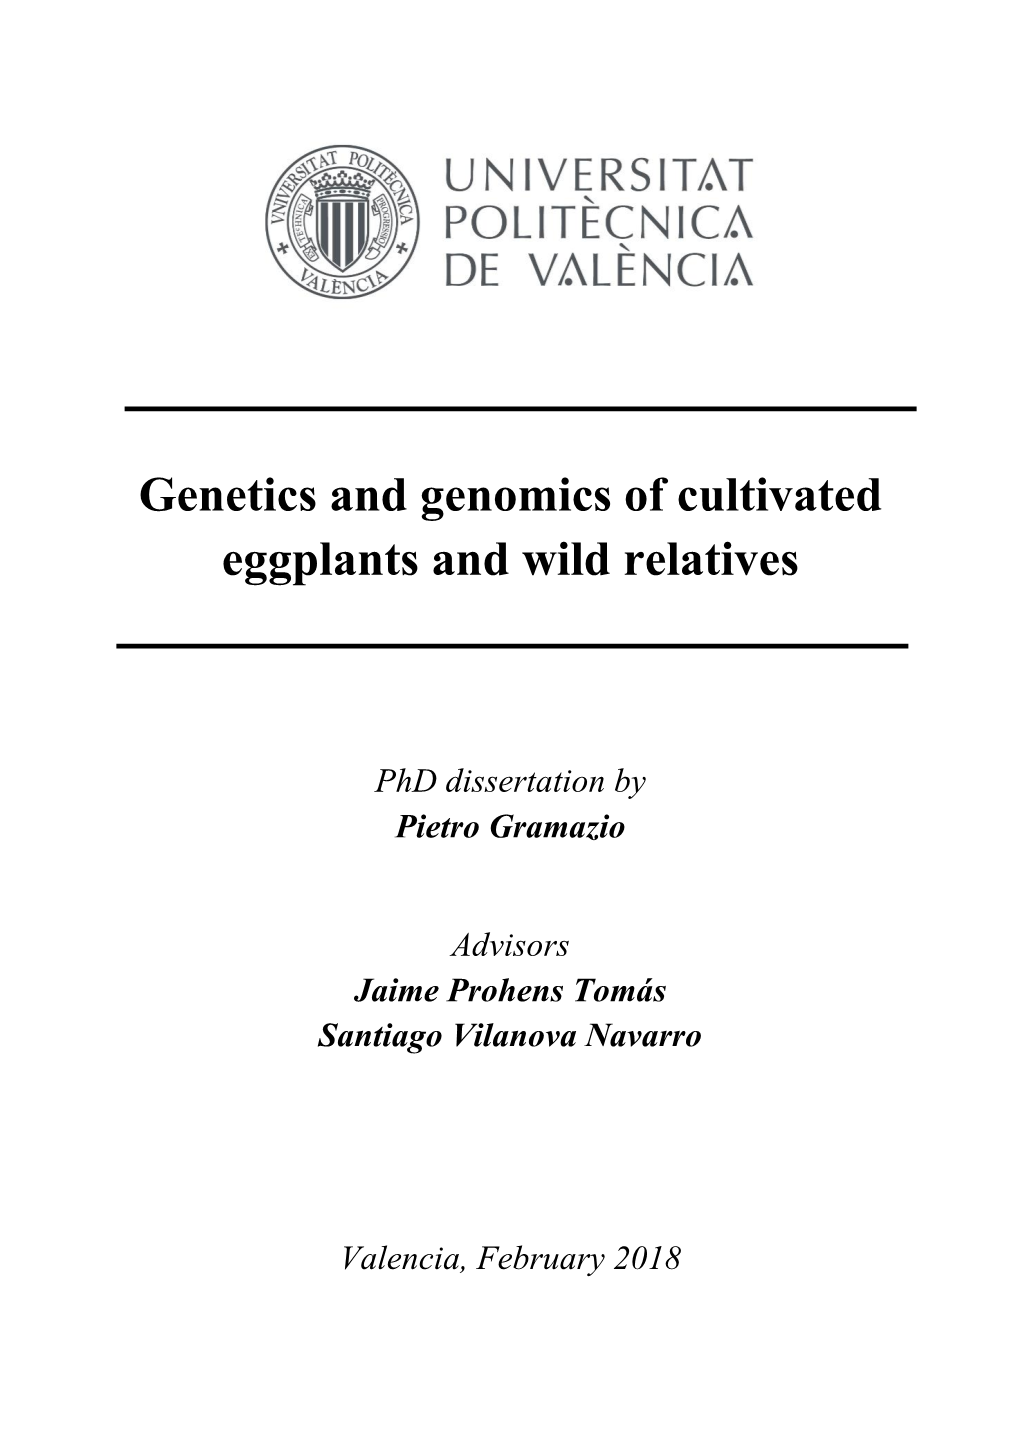 Genetics and Genomics of Cultivated Eggplants and Wild Relatives